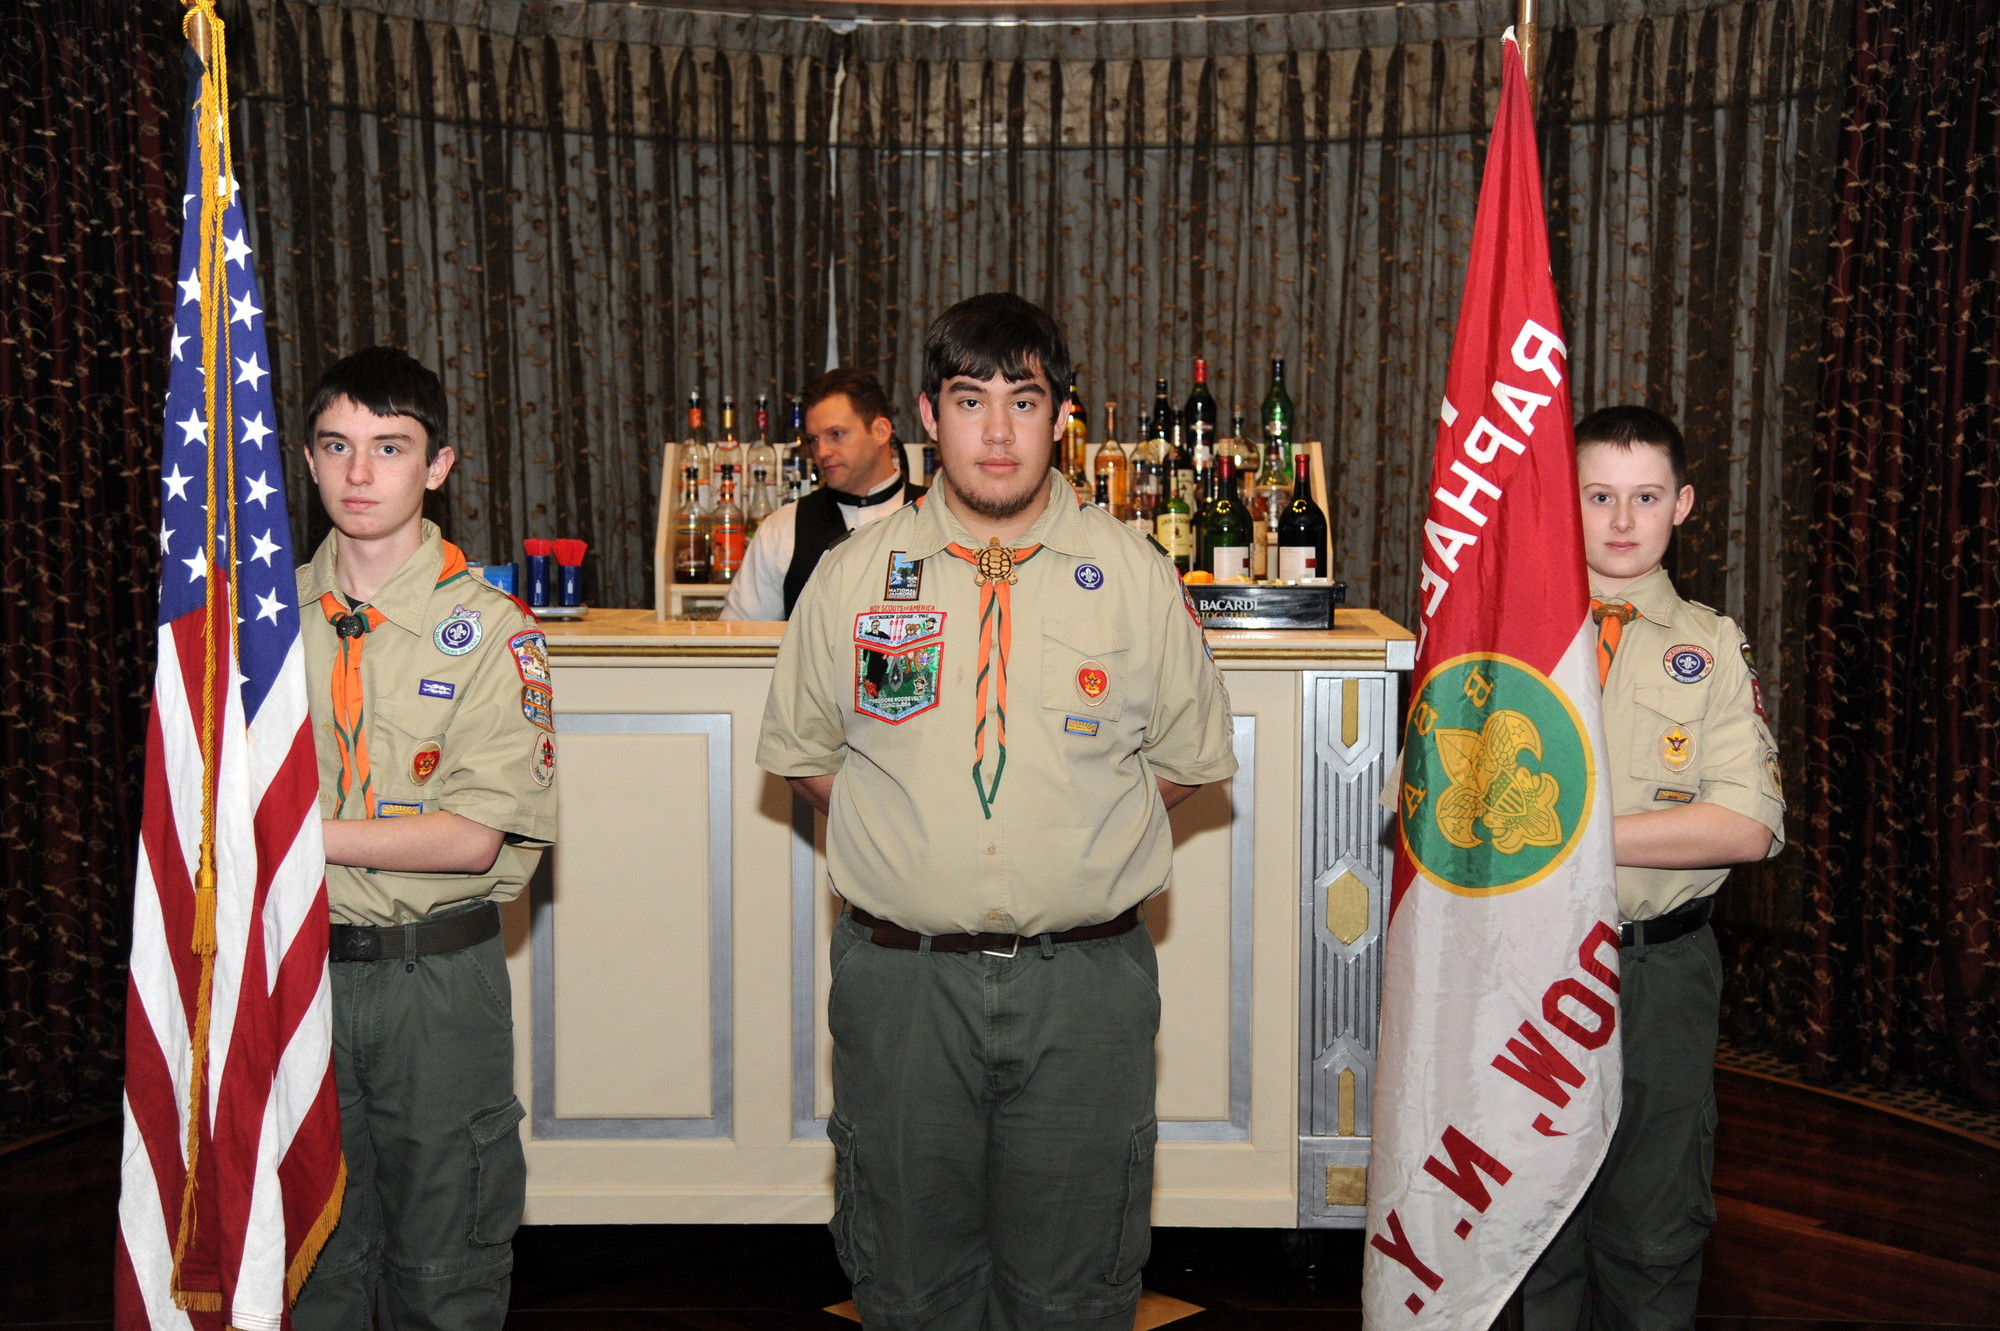 Thomas Ferrone, left, Patrick Hart, Jack Doughty of East Meadow Boy Scout Troop 362 led the Color Guard at the beginning of the East Meadow Chamber of Commerce's 59th Annual Installation of Officers and Board of Directors on Jan. 24 at the Chateau Briand in Carle Place.